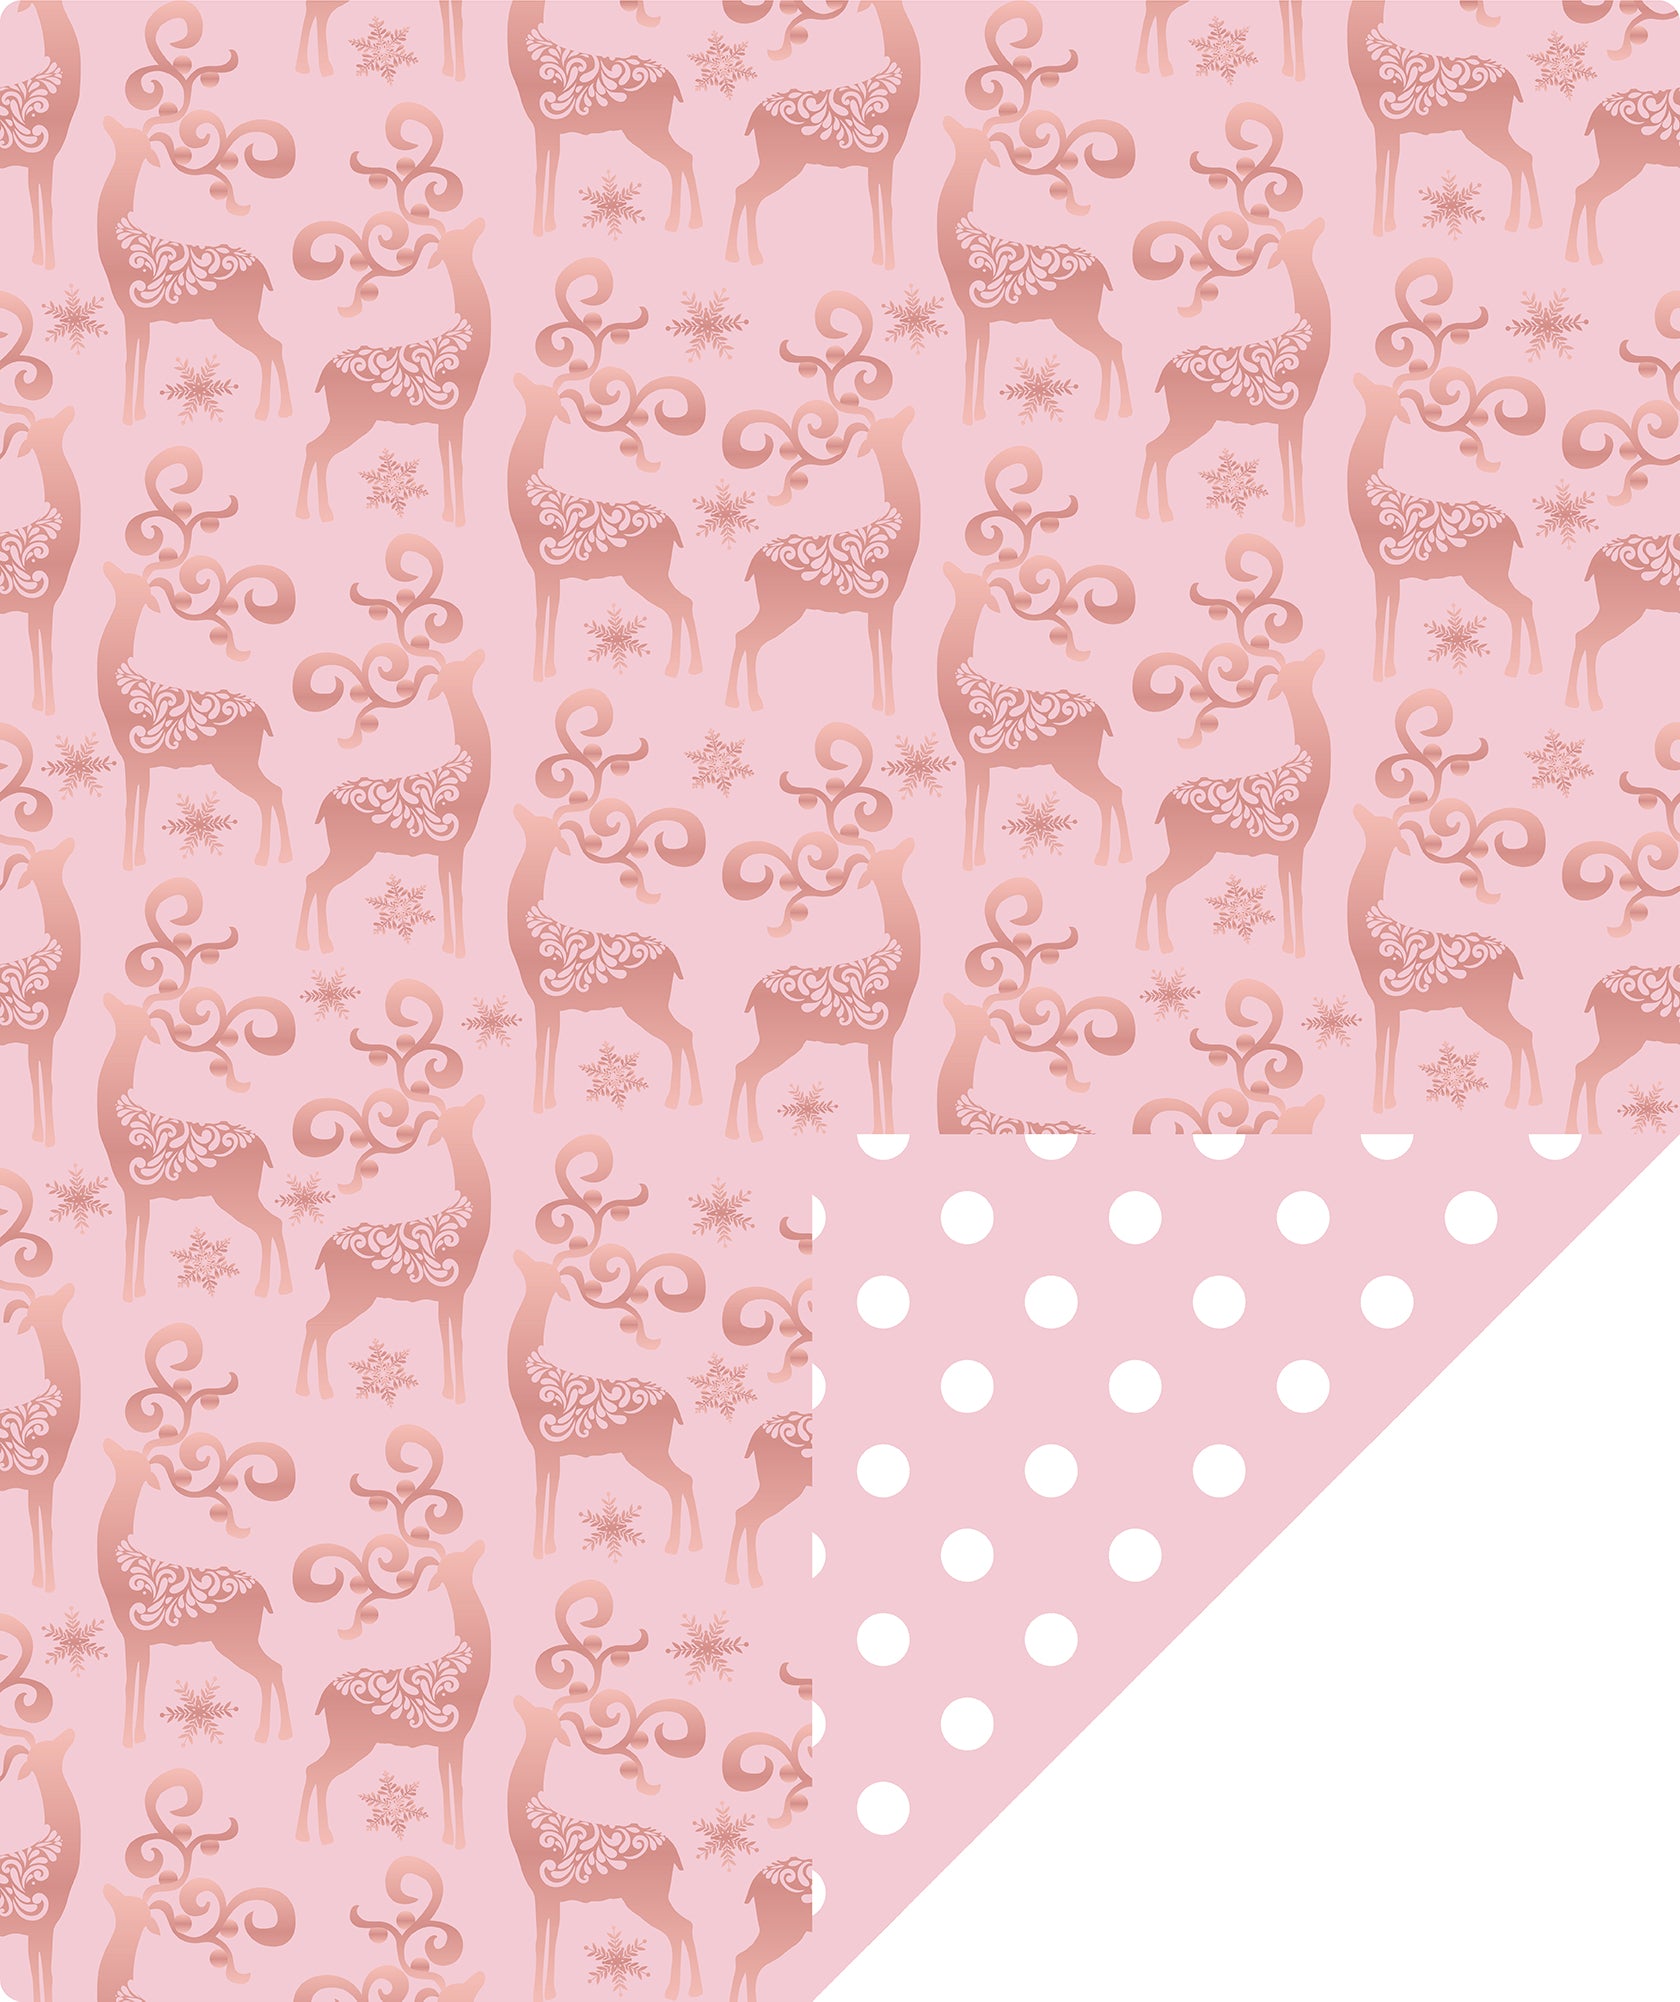 Rose Gold Deer Wrapping Paper Roll with White Polka Dots on Reverse Wholesale Wrapholic